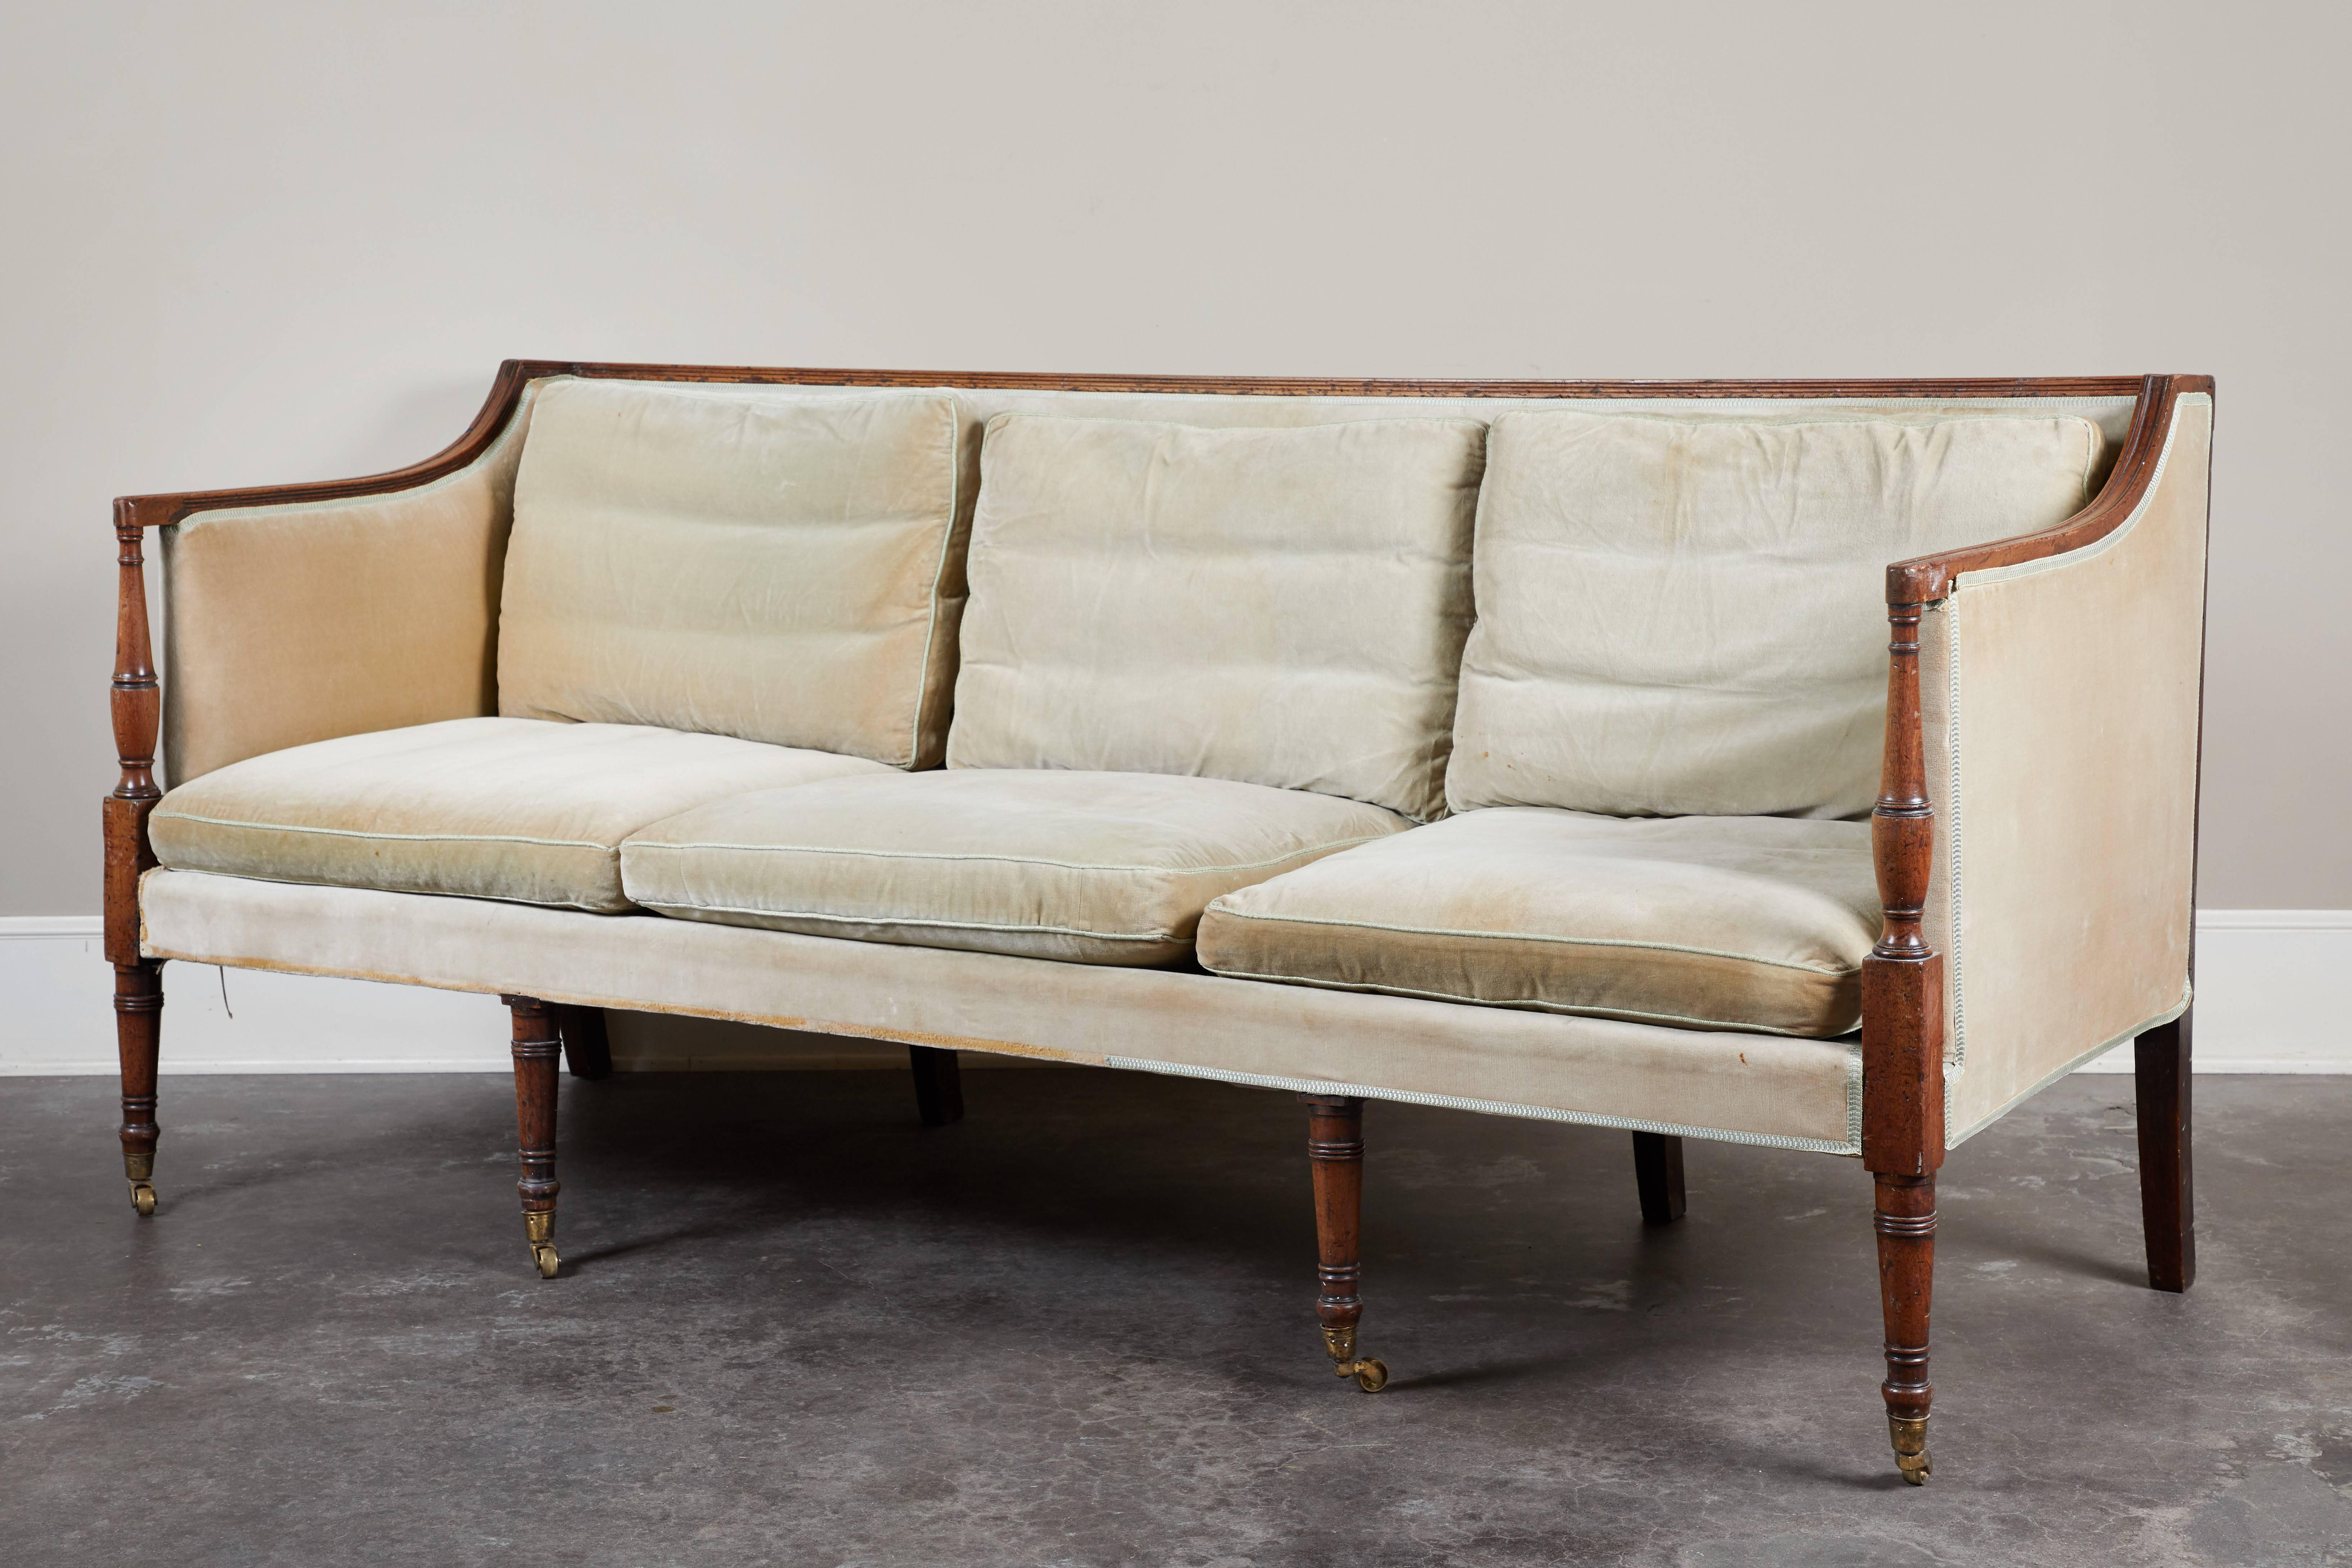 An early 19th century English Regency mahogany-trimmed sofa.  Turned front legs on wheels, delicate armrests and transitional, square shape.